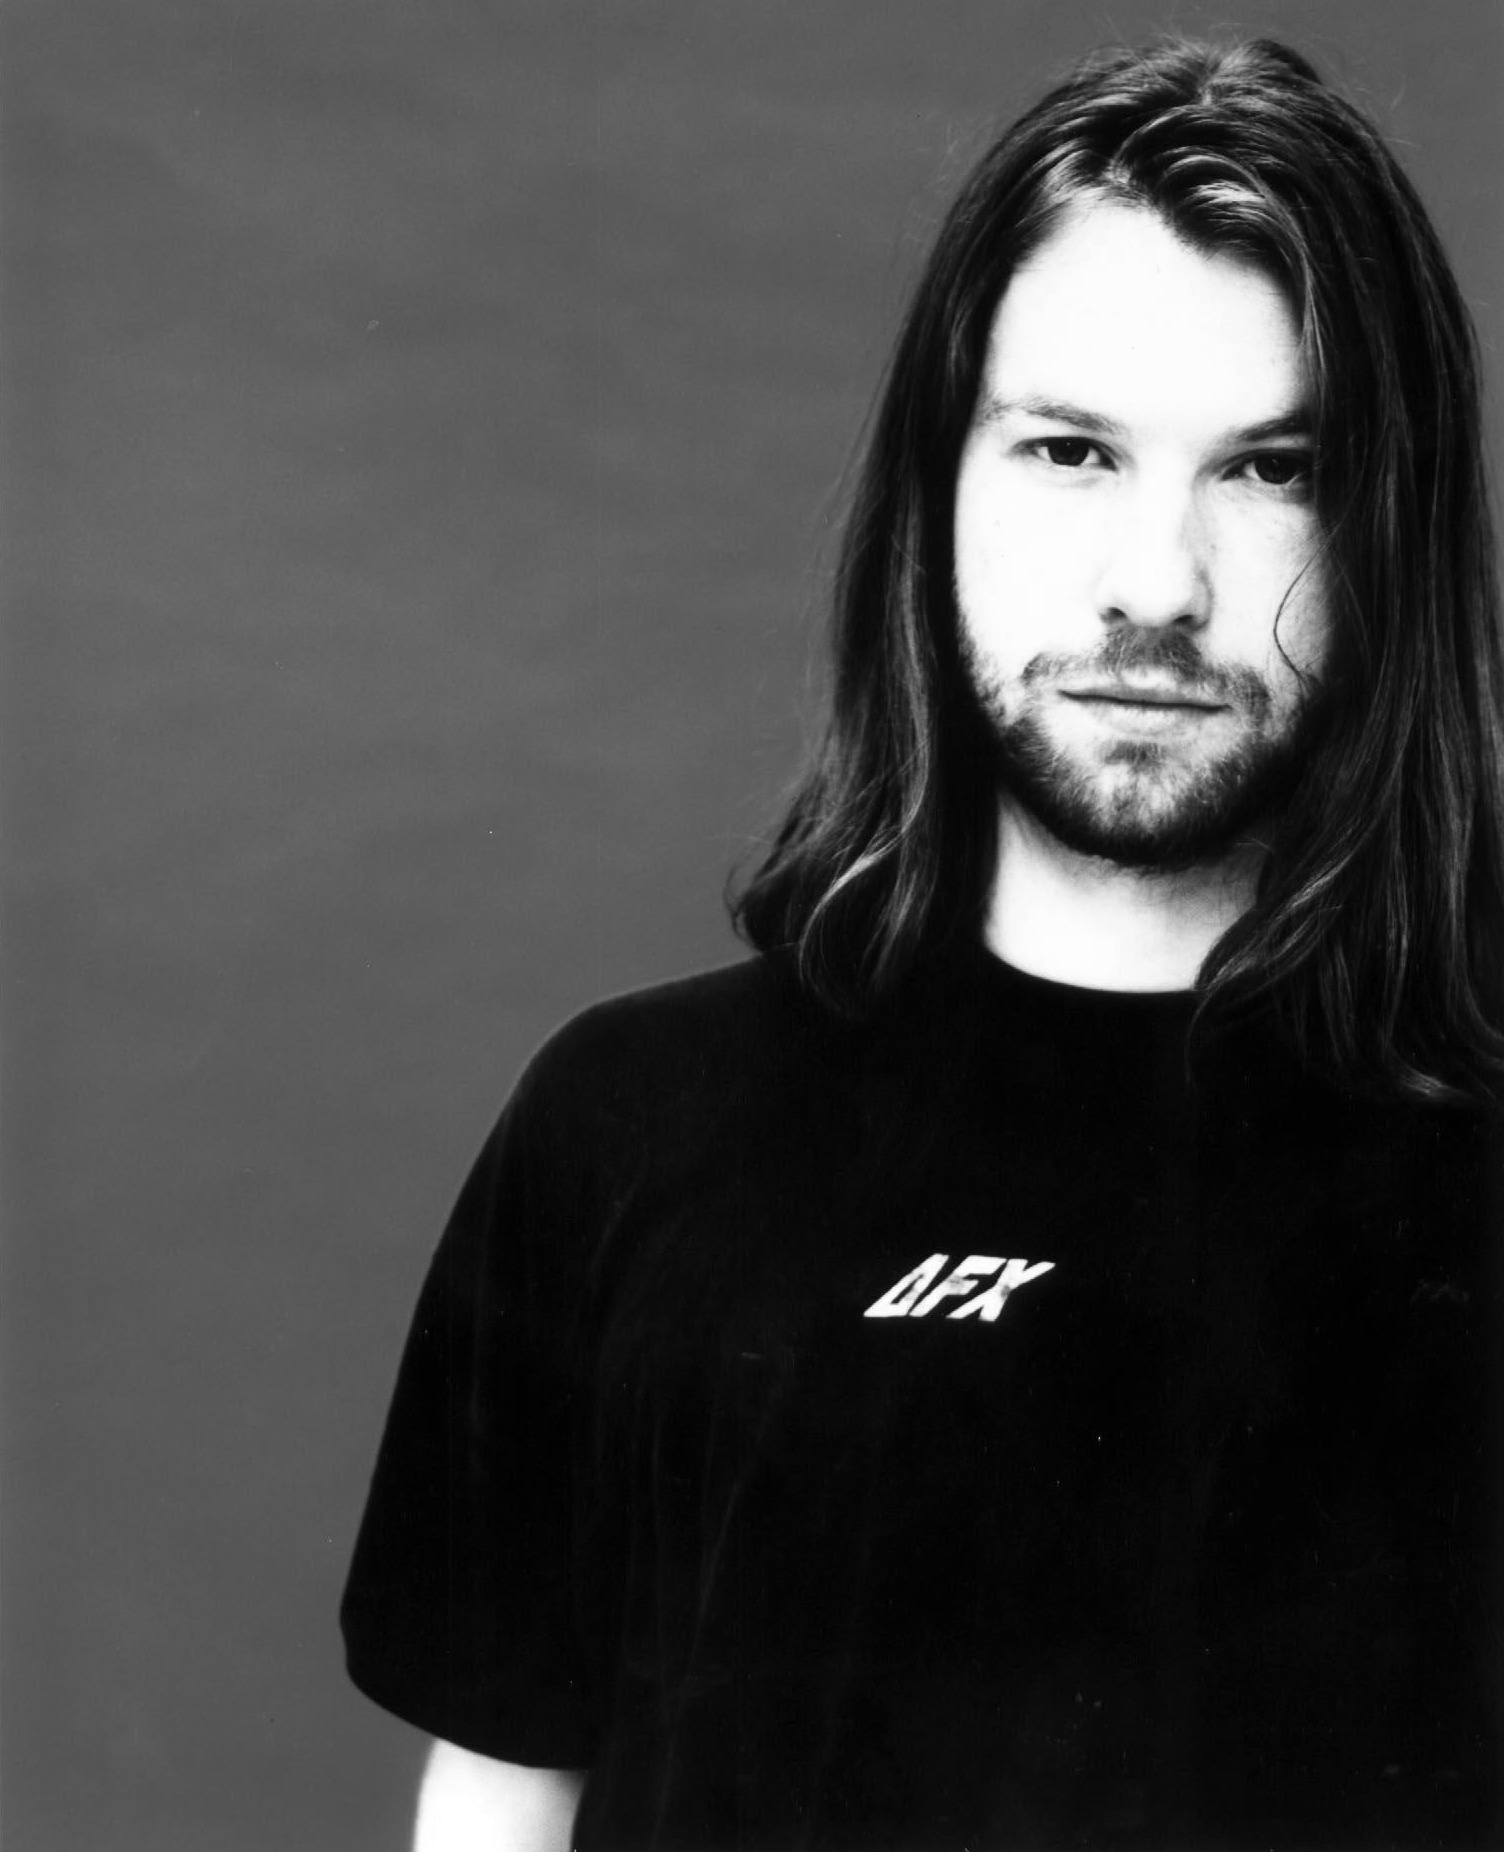 Richard D. James, better known as Aphex Twin, is widely recognized... 